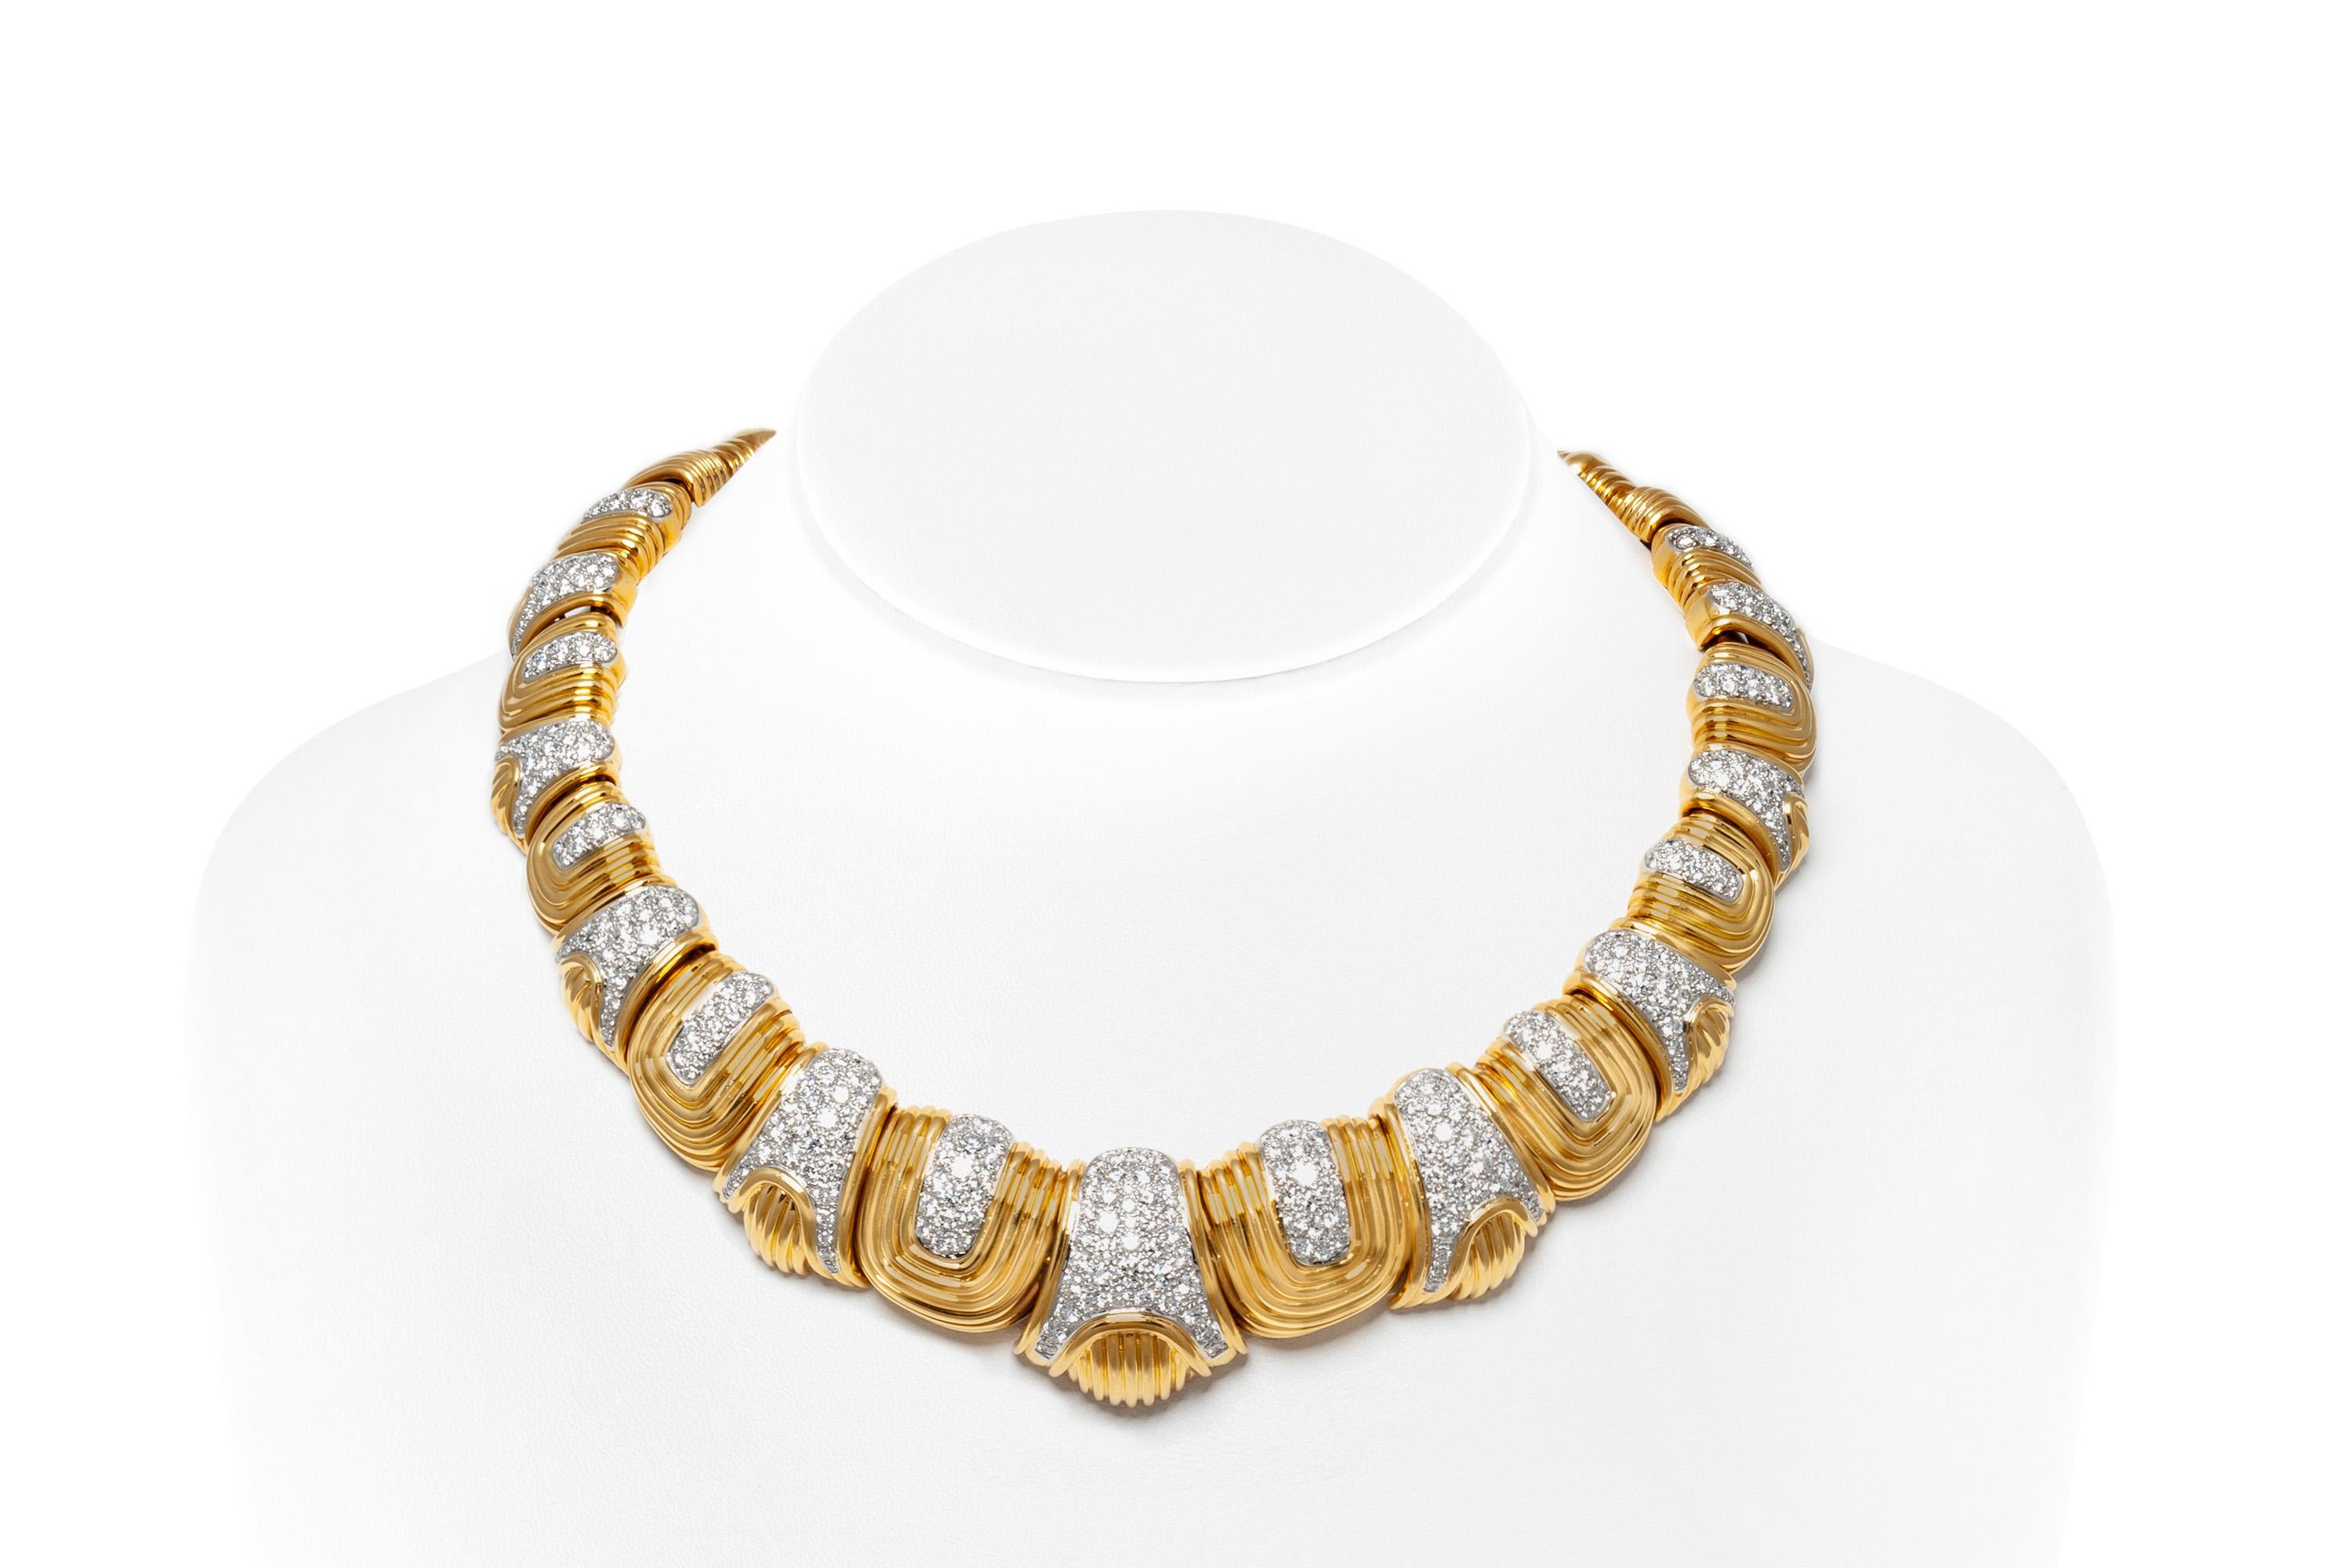 European choker necklace, finely crafted in 18k yellow gold with diamonds weighing approximately a total of 20.00 carats.